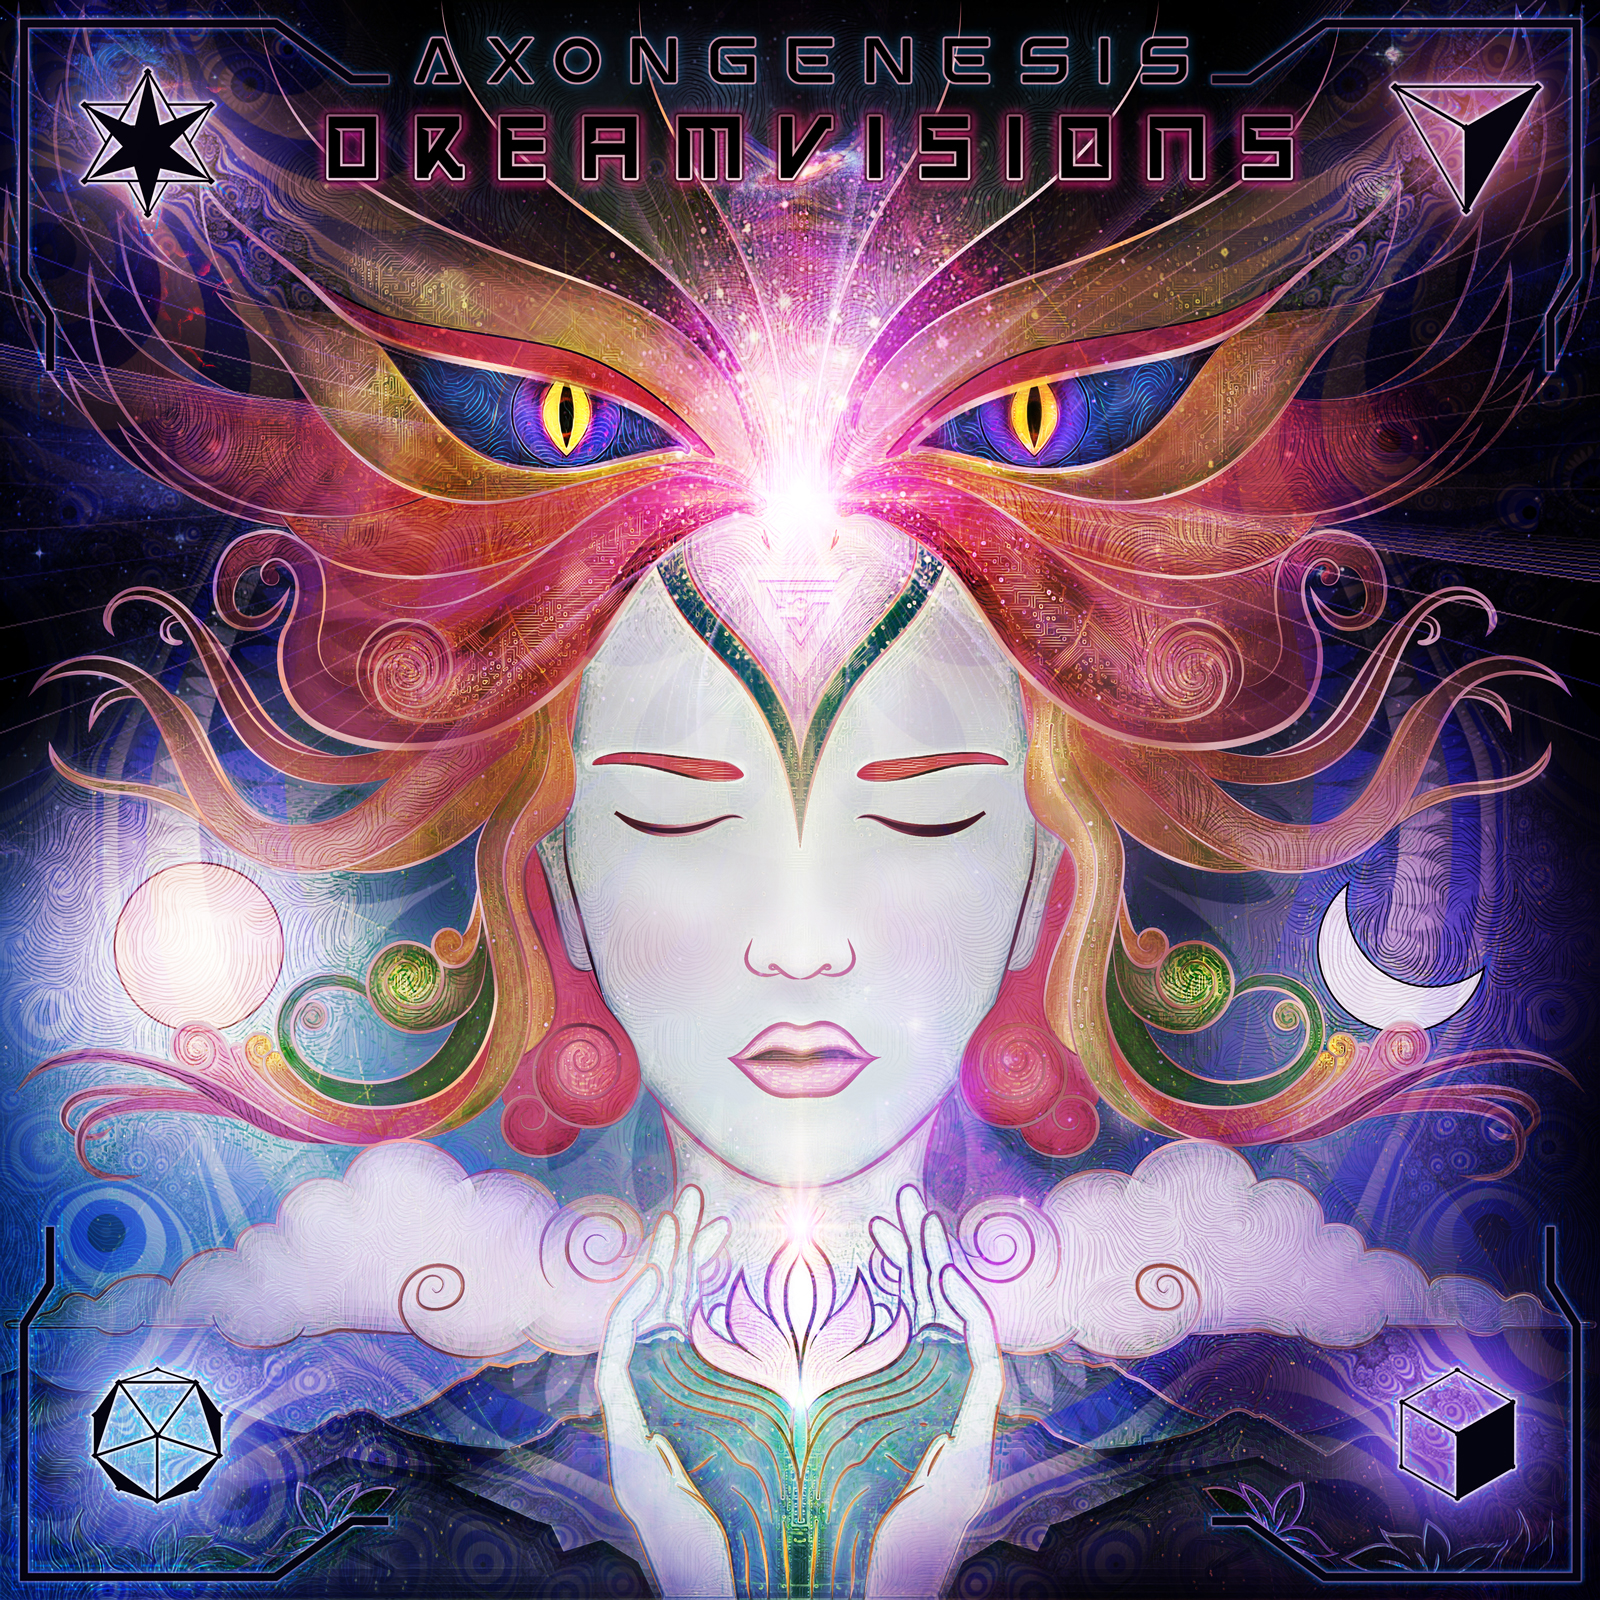 Dream Visions - Music and Cover Art by Axon Genesis